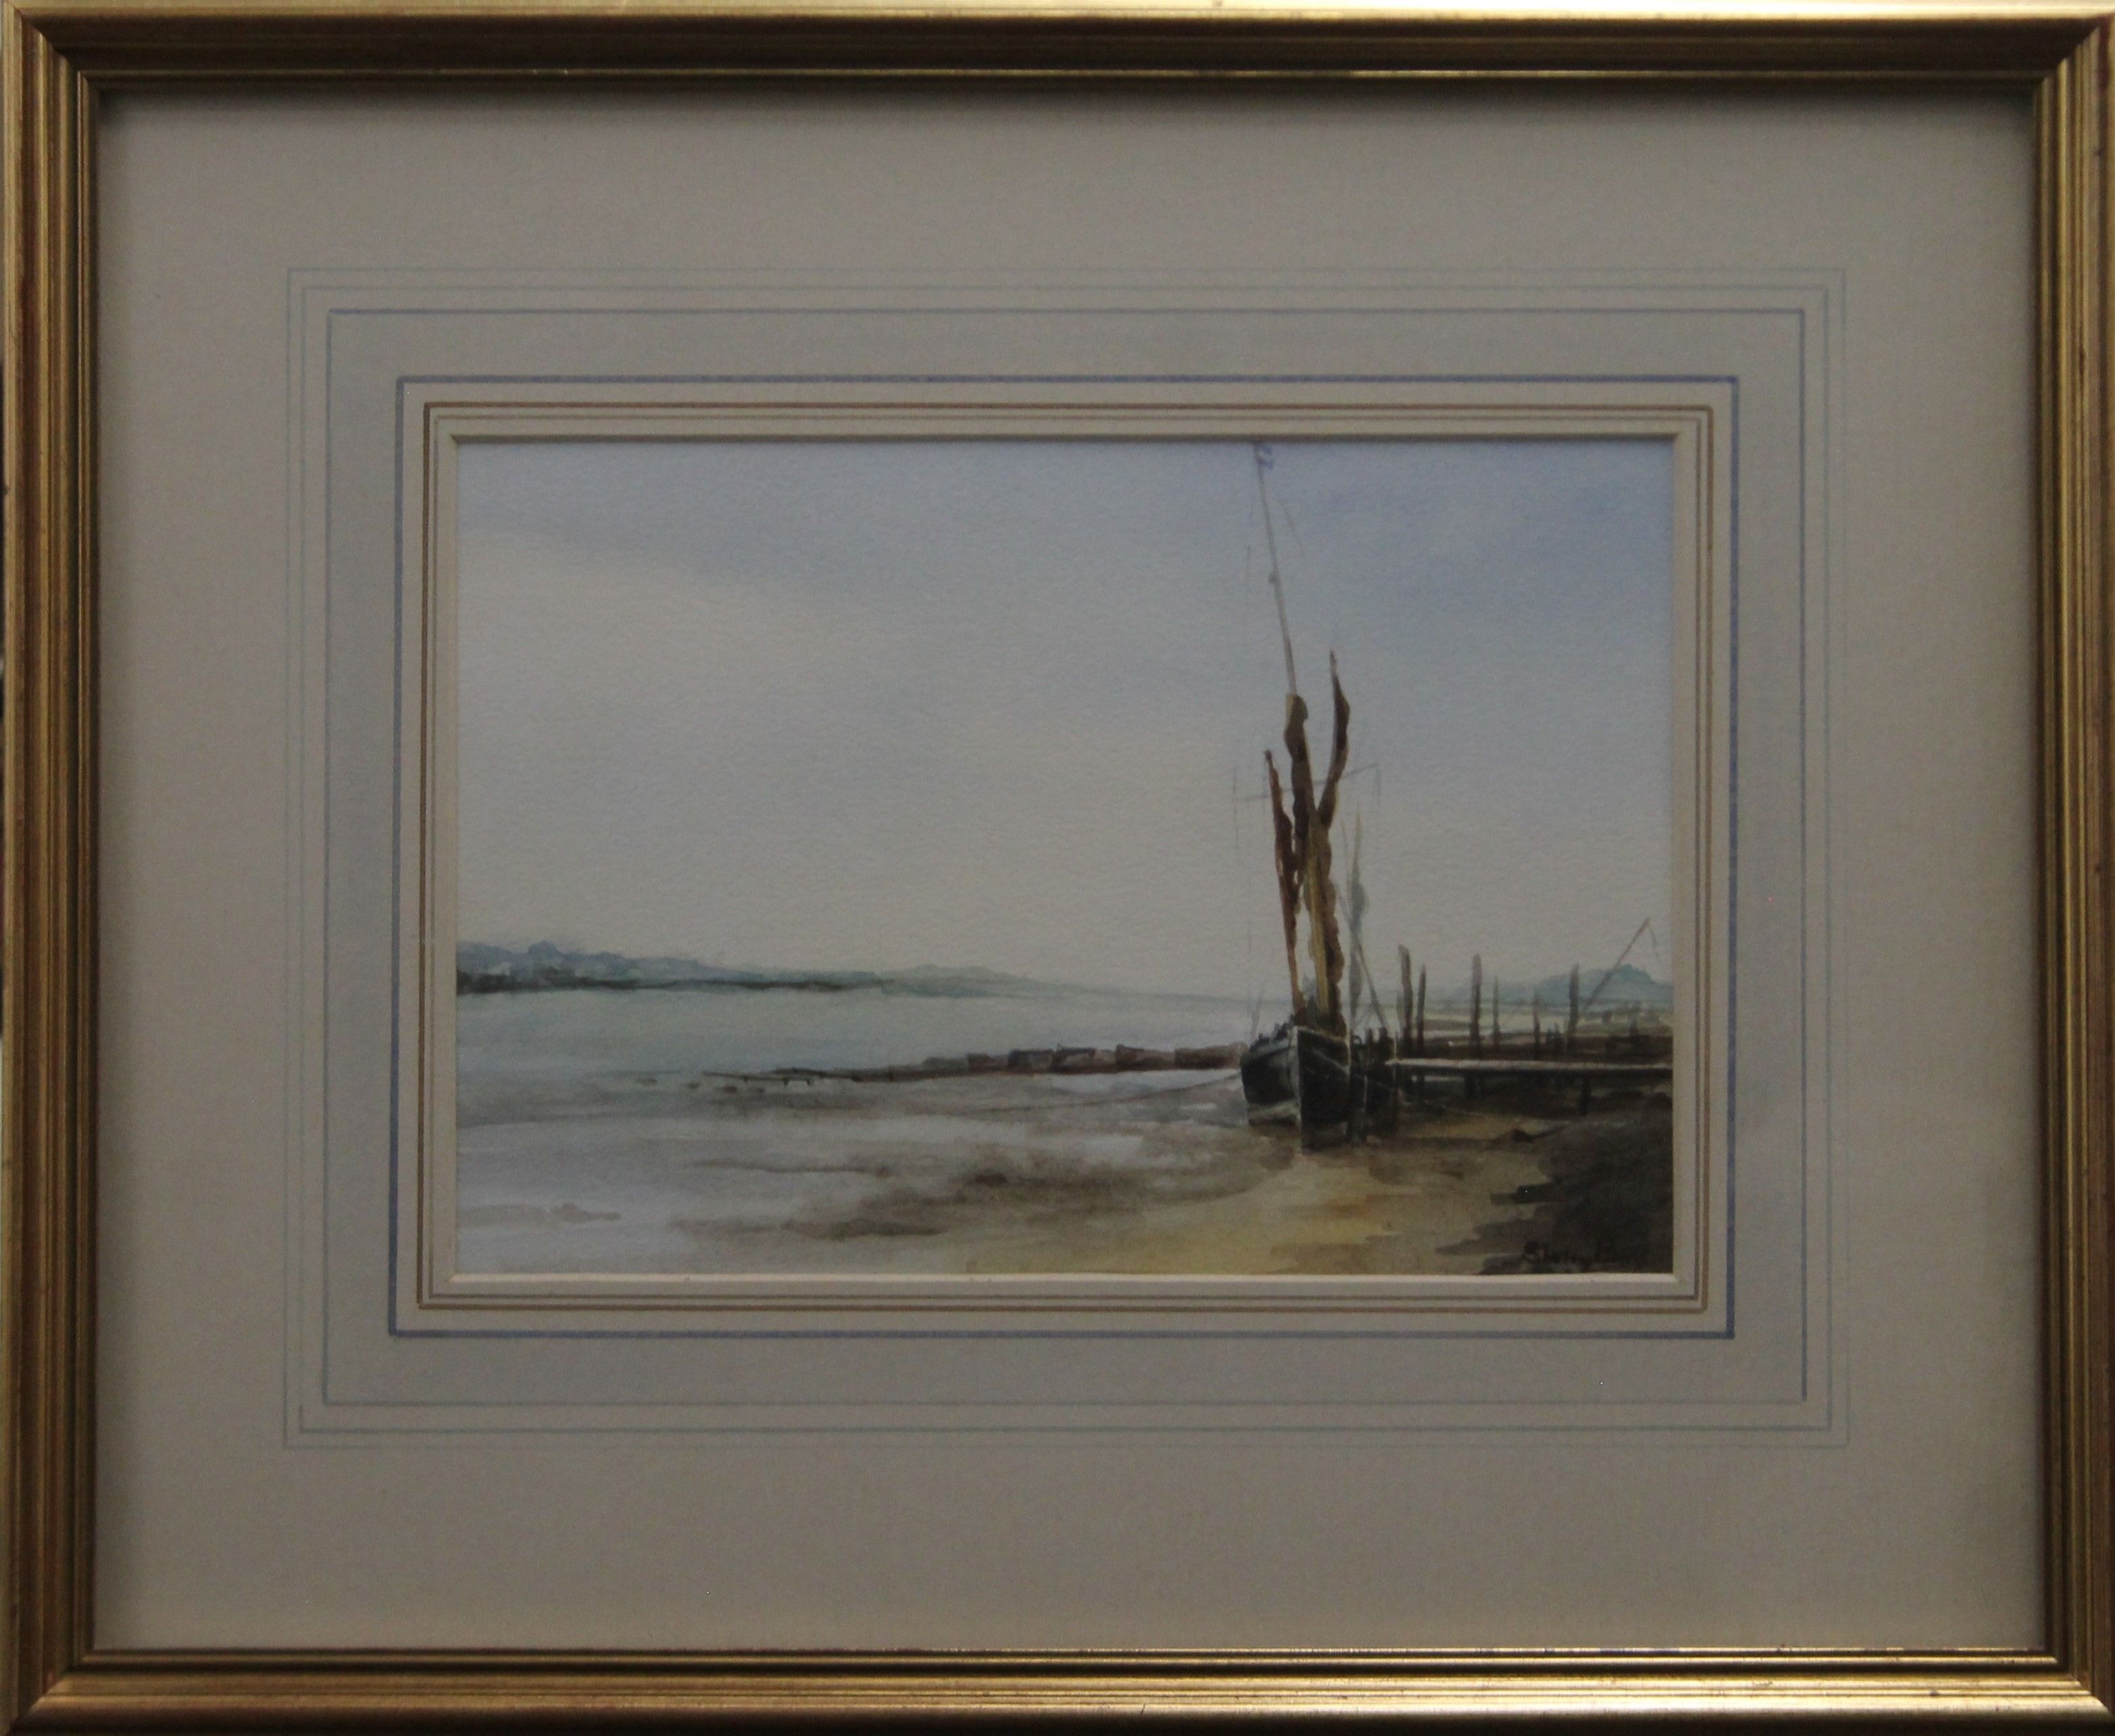 ADRIAN TAUNTON, Barges at Low Tide, watercolour, framed and glazed, - Image 5 of 6